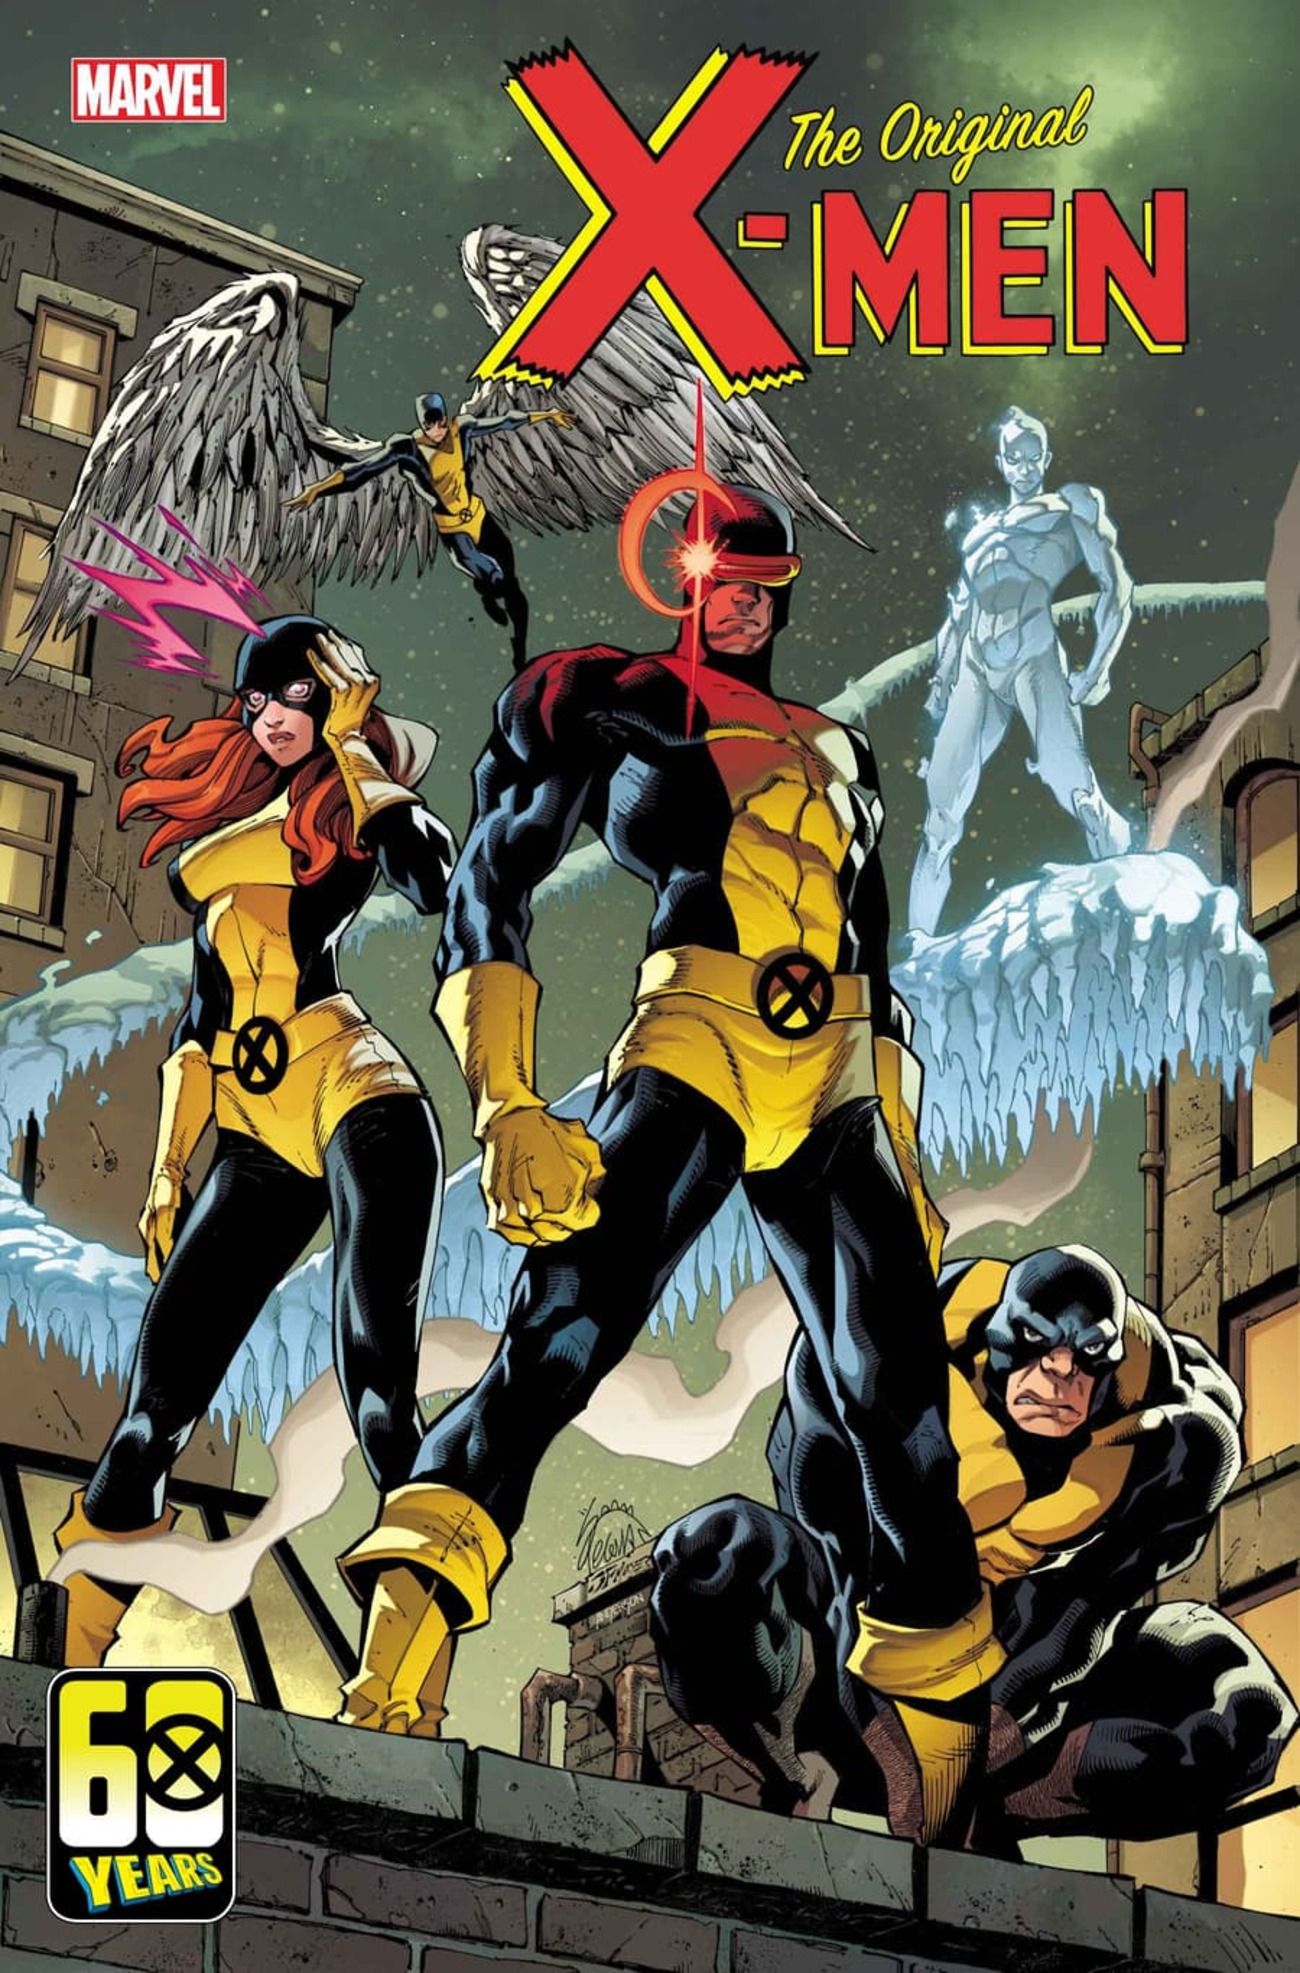 X-Men Is Turning the Original 5 Members into a Twisted Villain Team